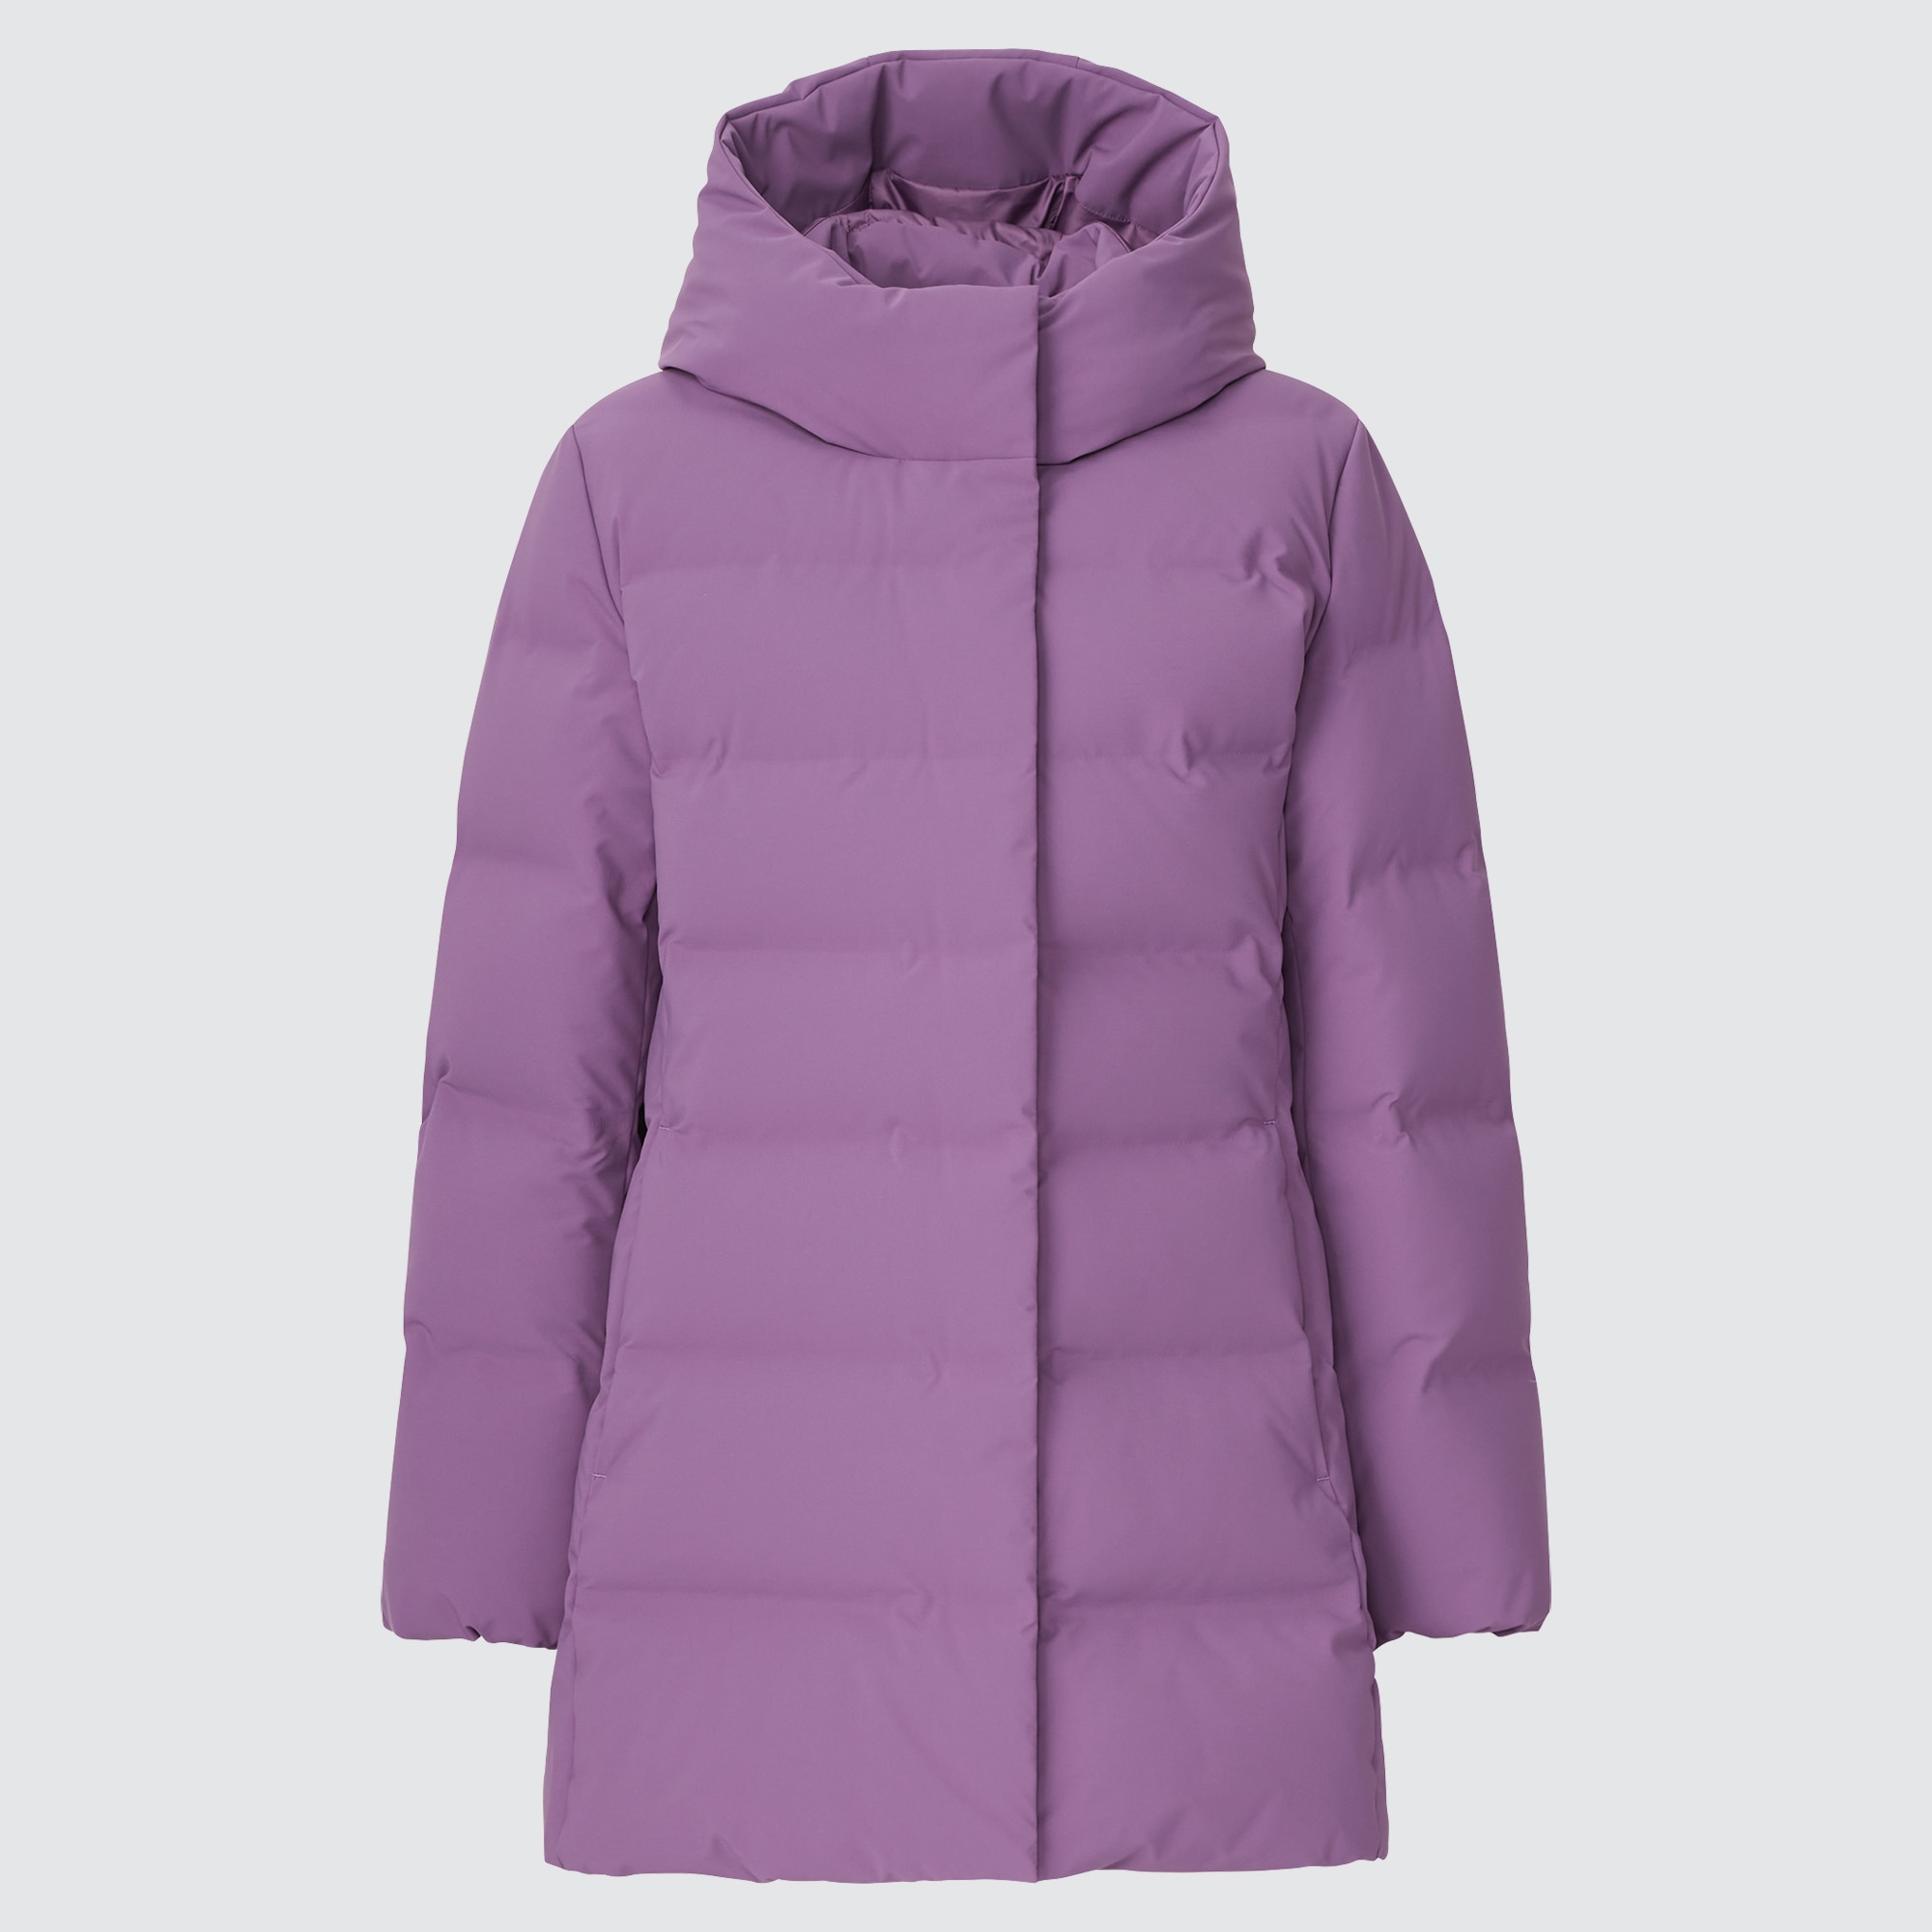 Uniqlo Coat TryOn Sesh 8 Winter Puffer Jackets  The Mom Edit